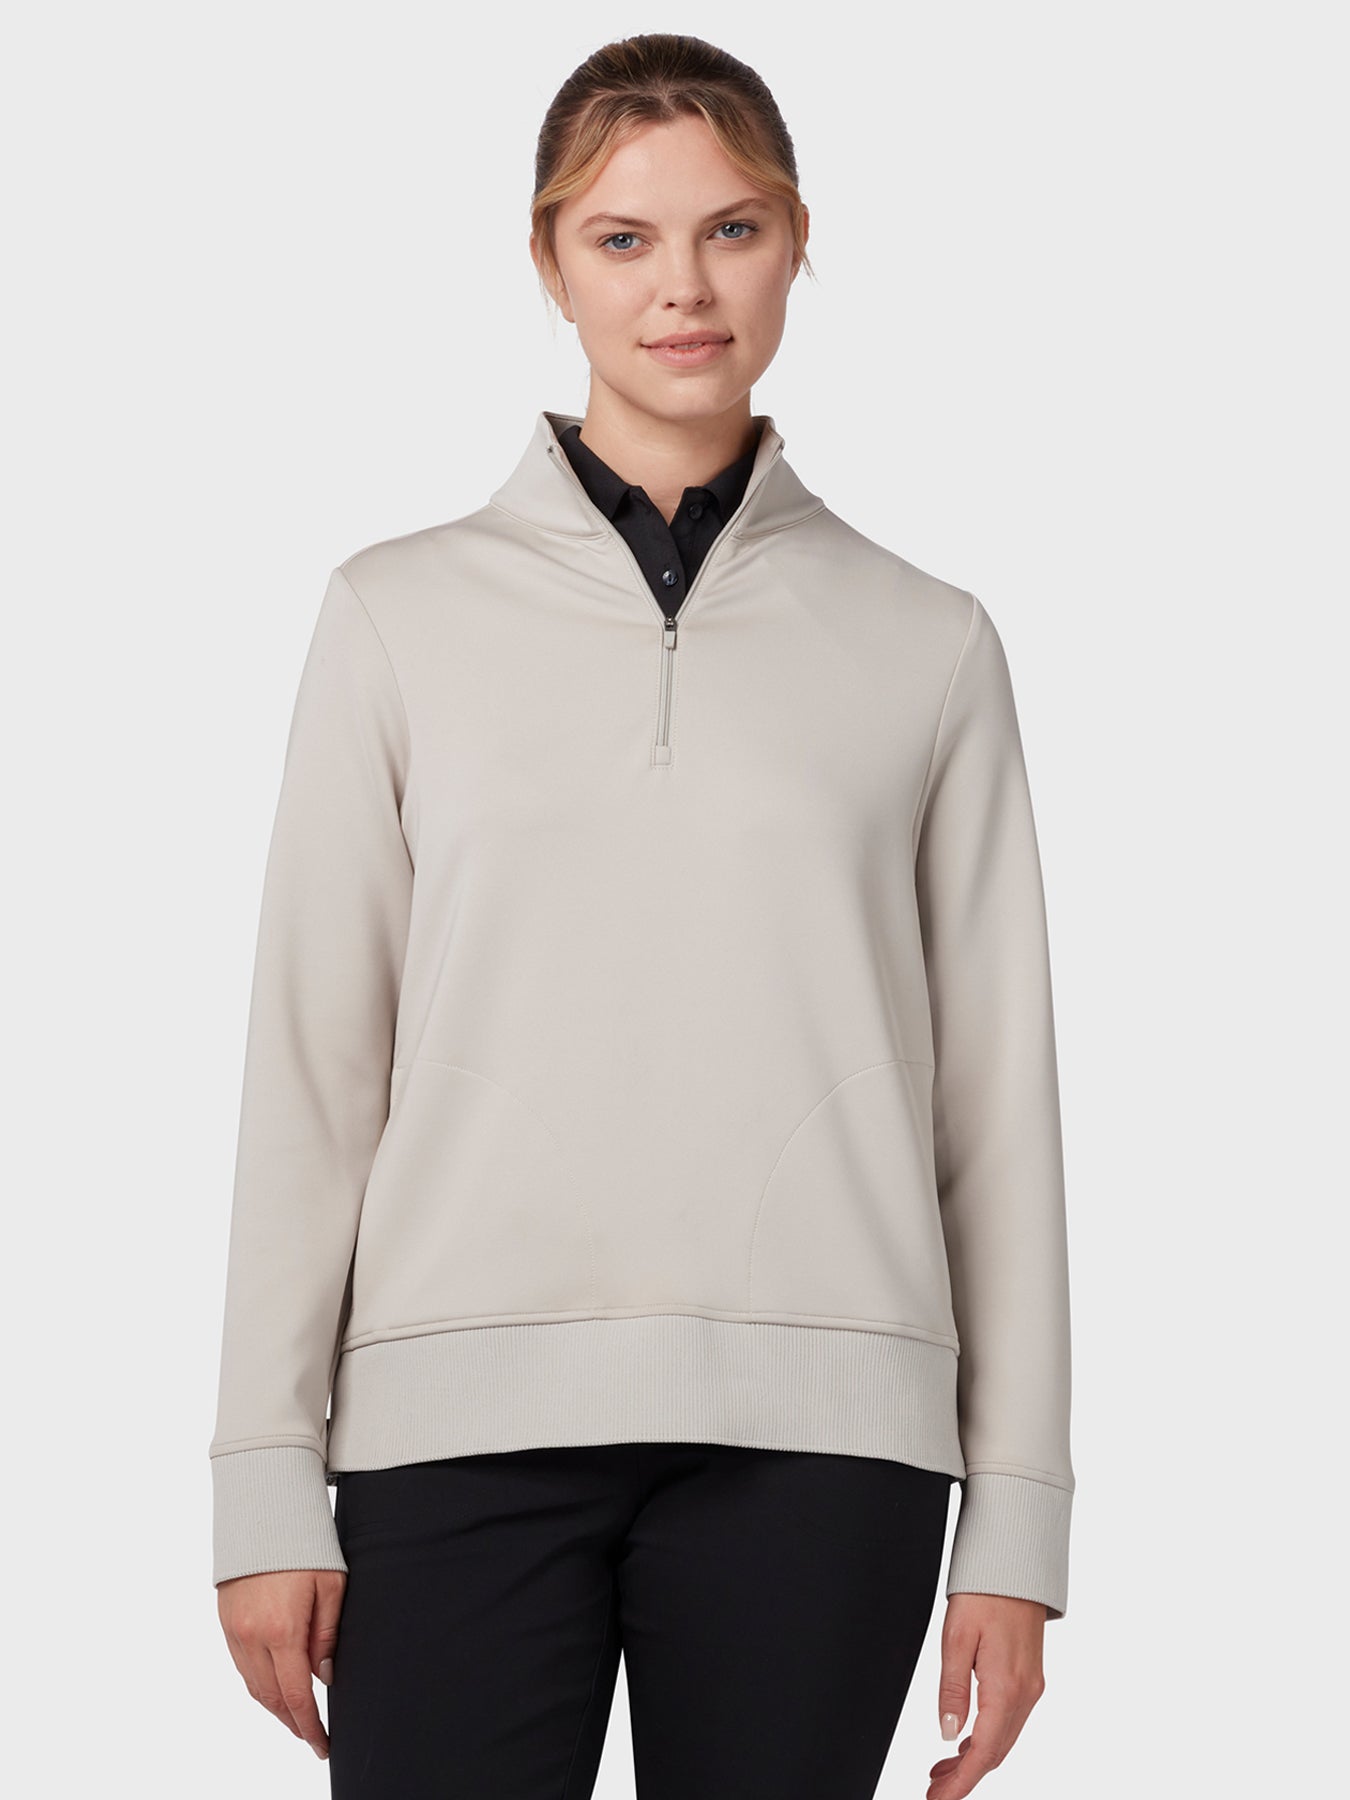 View Midweight Womens Fleece Crossover In Chateau Grey Chateau Grey L information